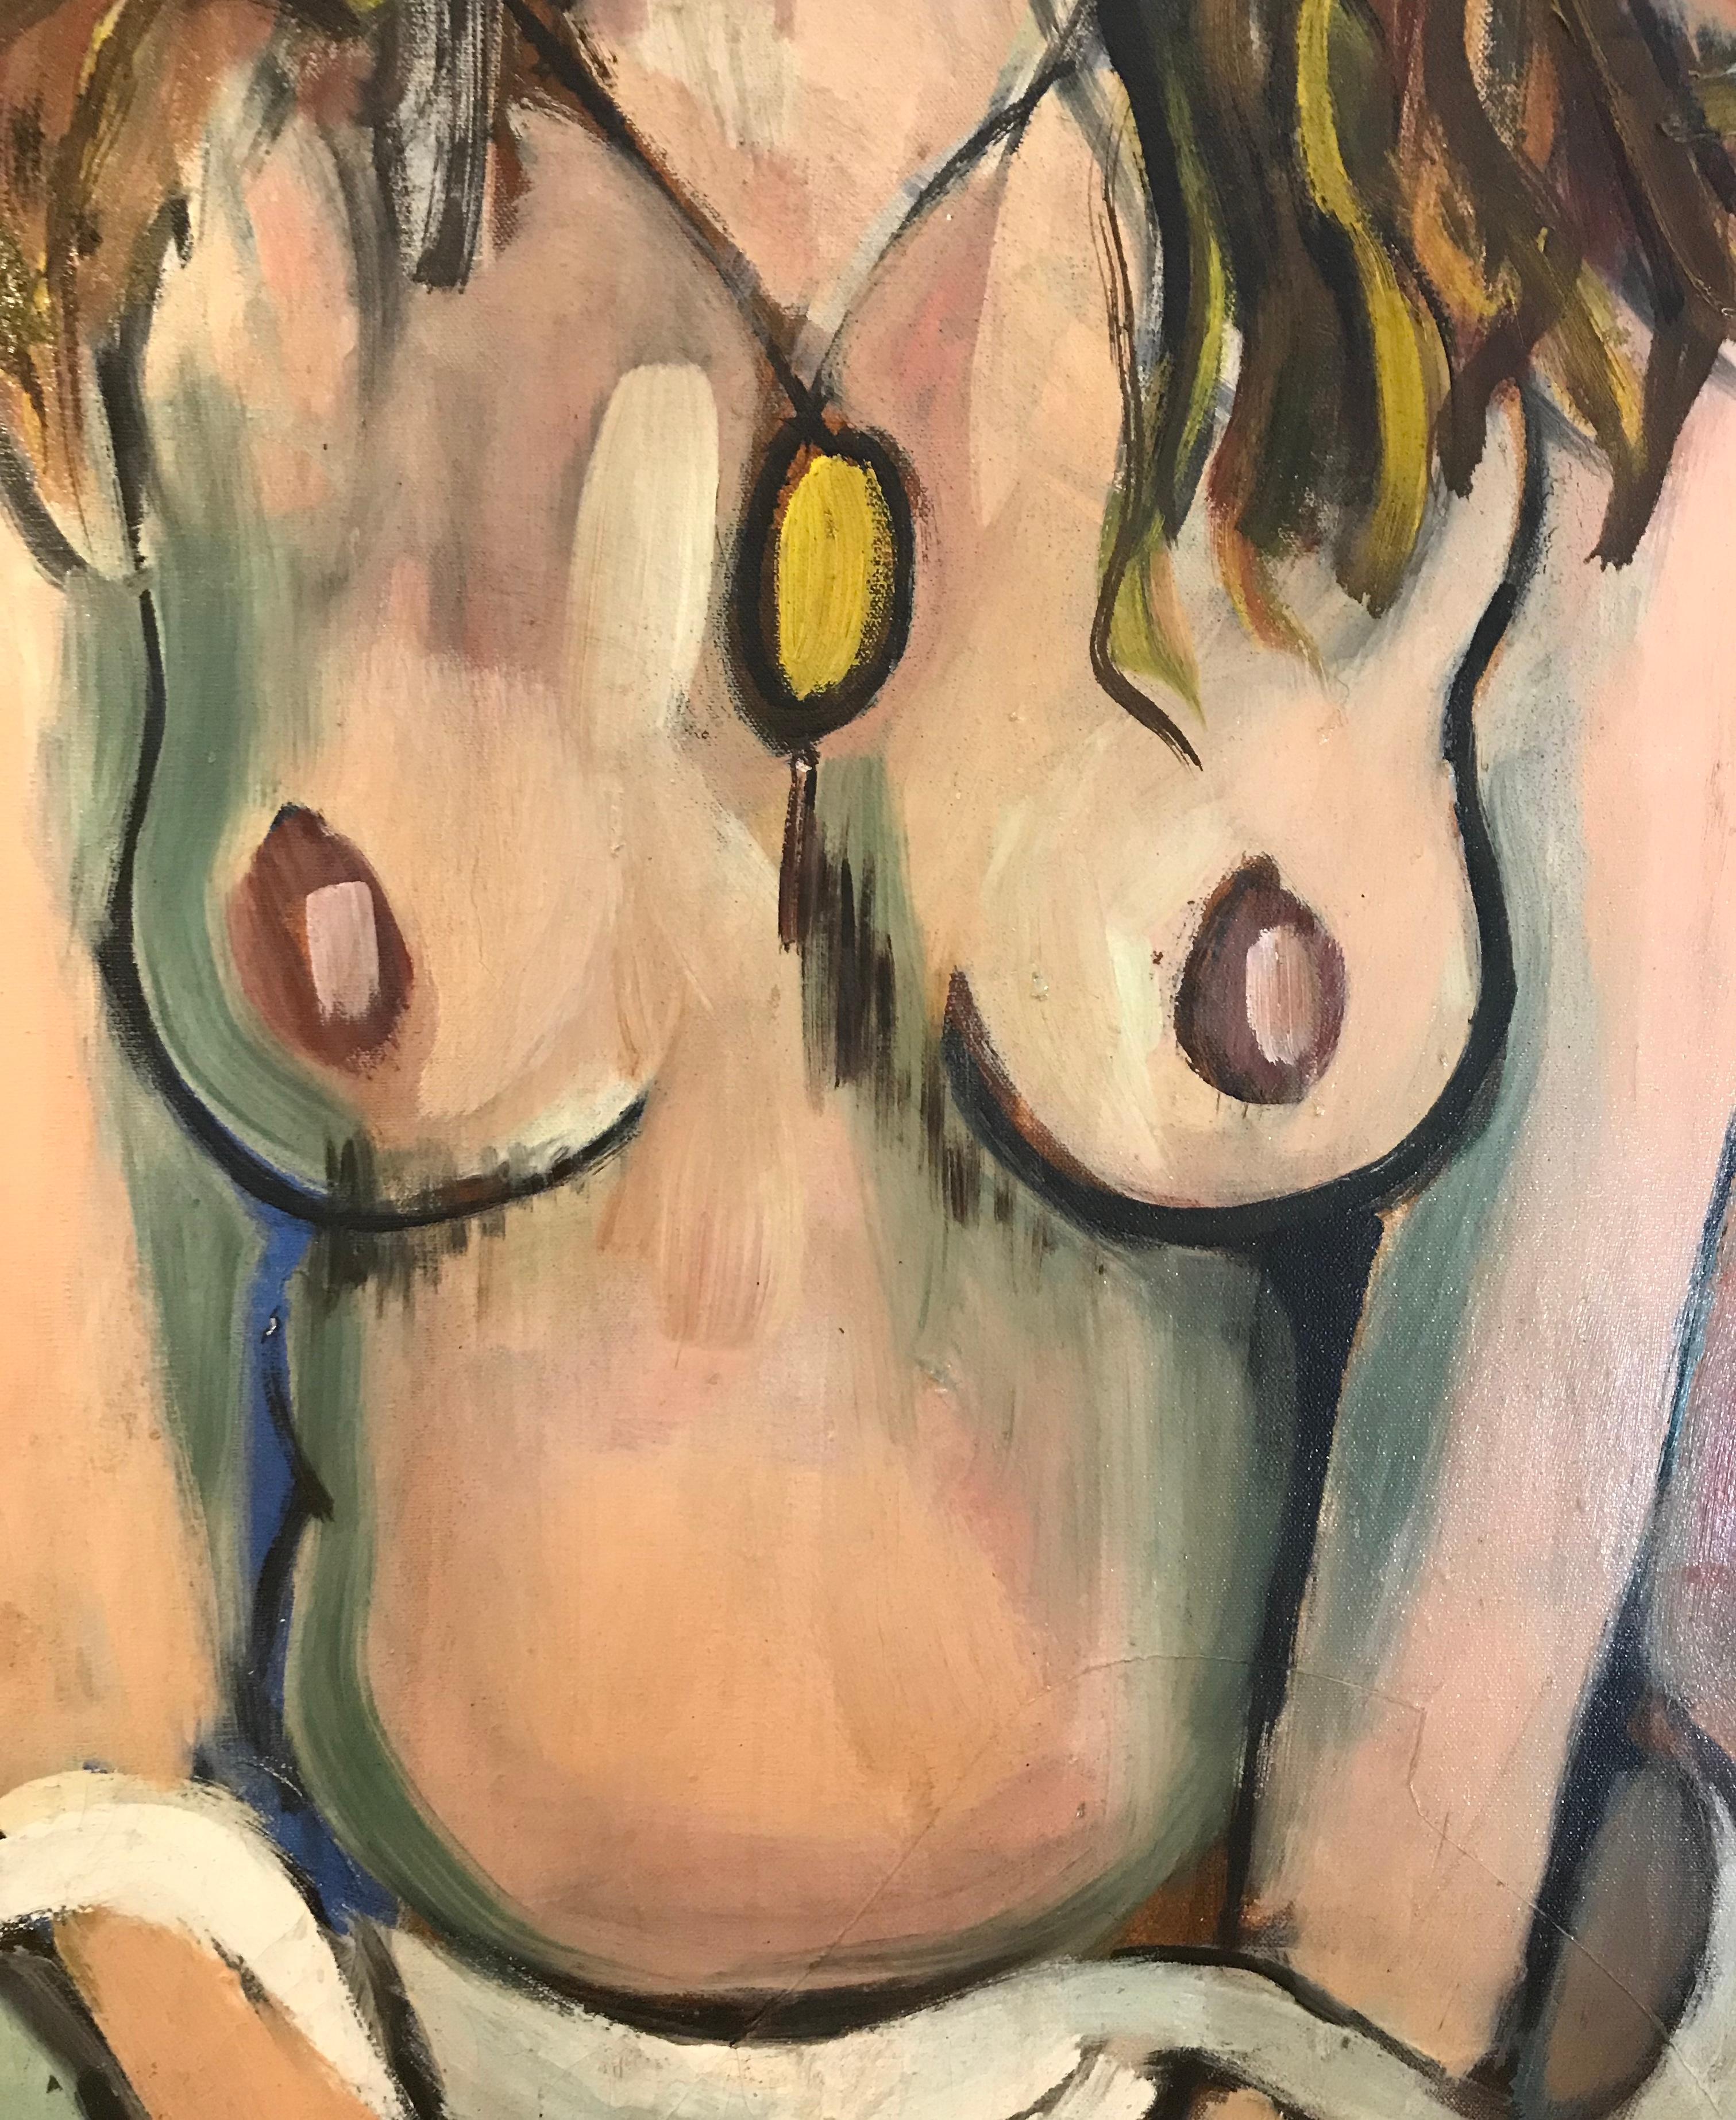 Nude with a yellow medallion by William GOLIASCH - Oil on canvas 46x81 cm - Yellow Nude Painting by William Goliasch